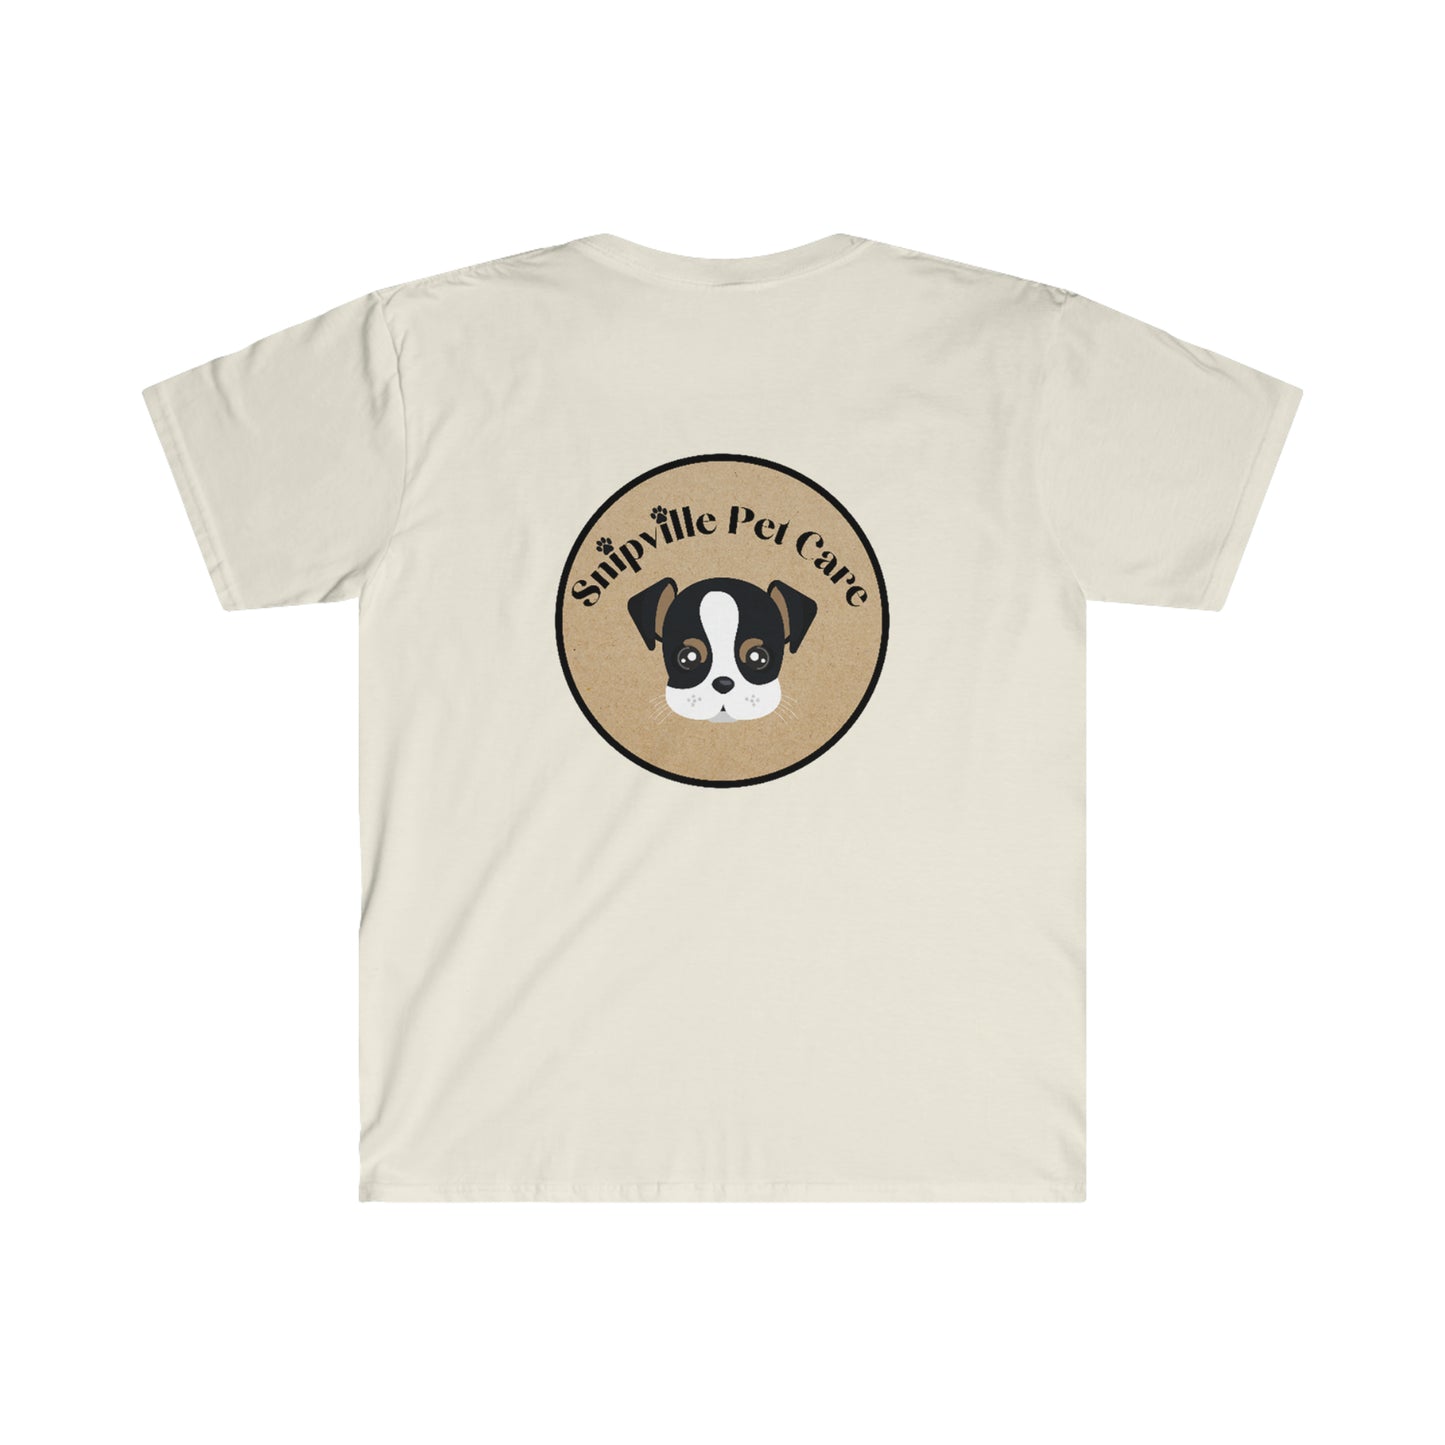 I'd Rather Be Chasing A Ball - Unisex Softstyle T-Shirt